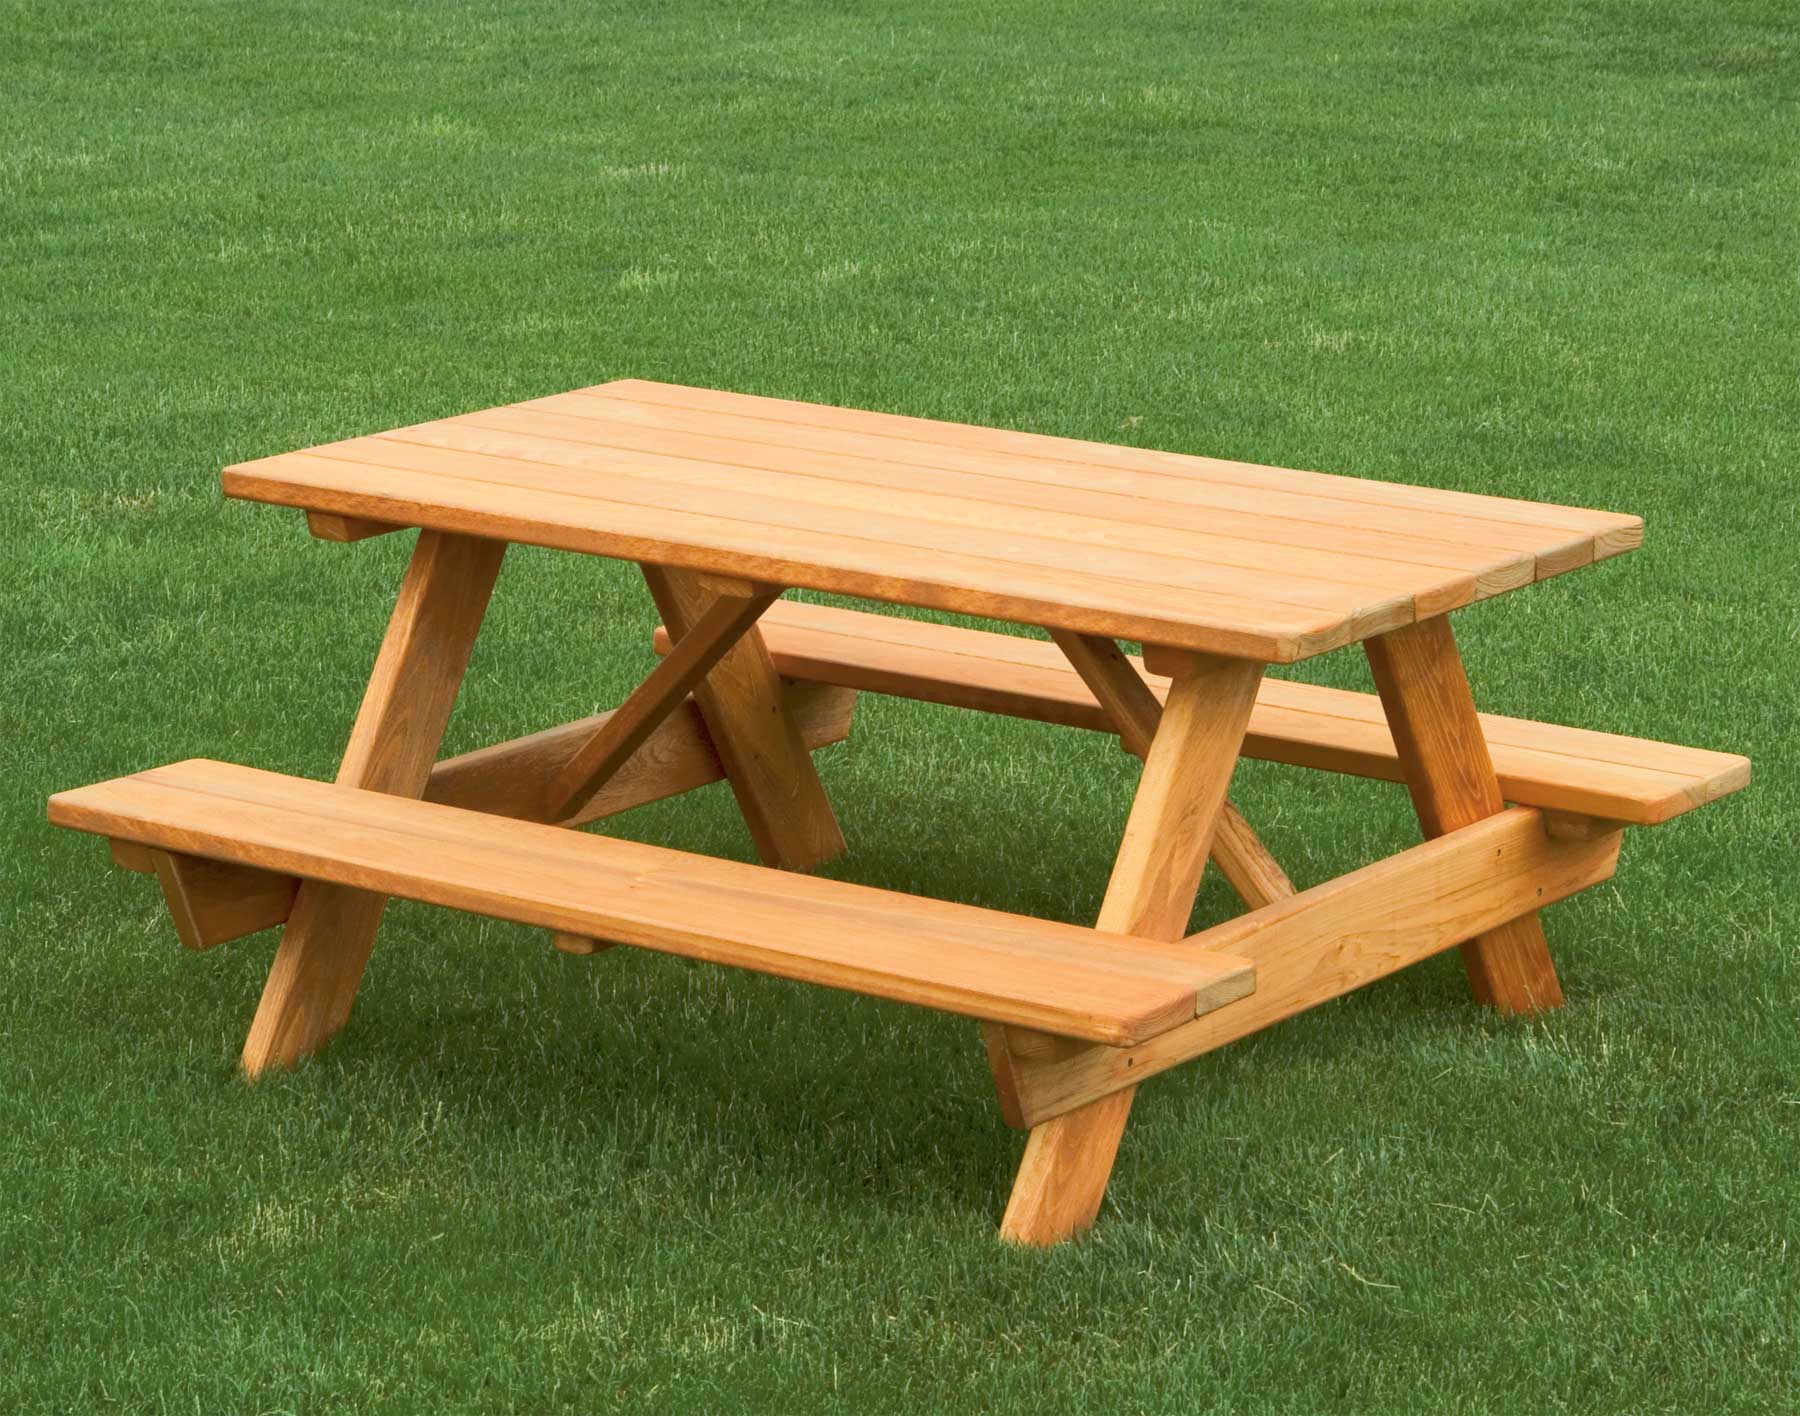 This picnic table has seating for adults, a high chair and ...